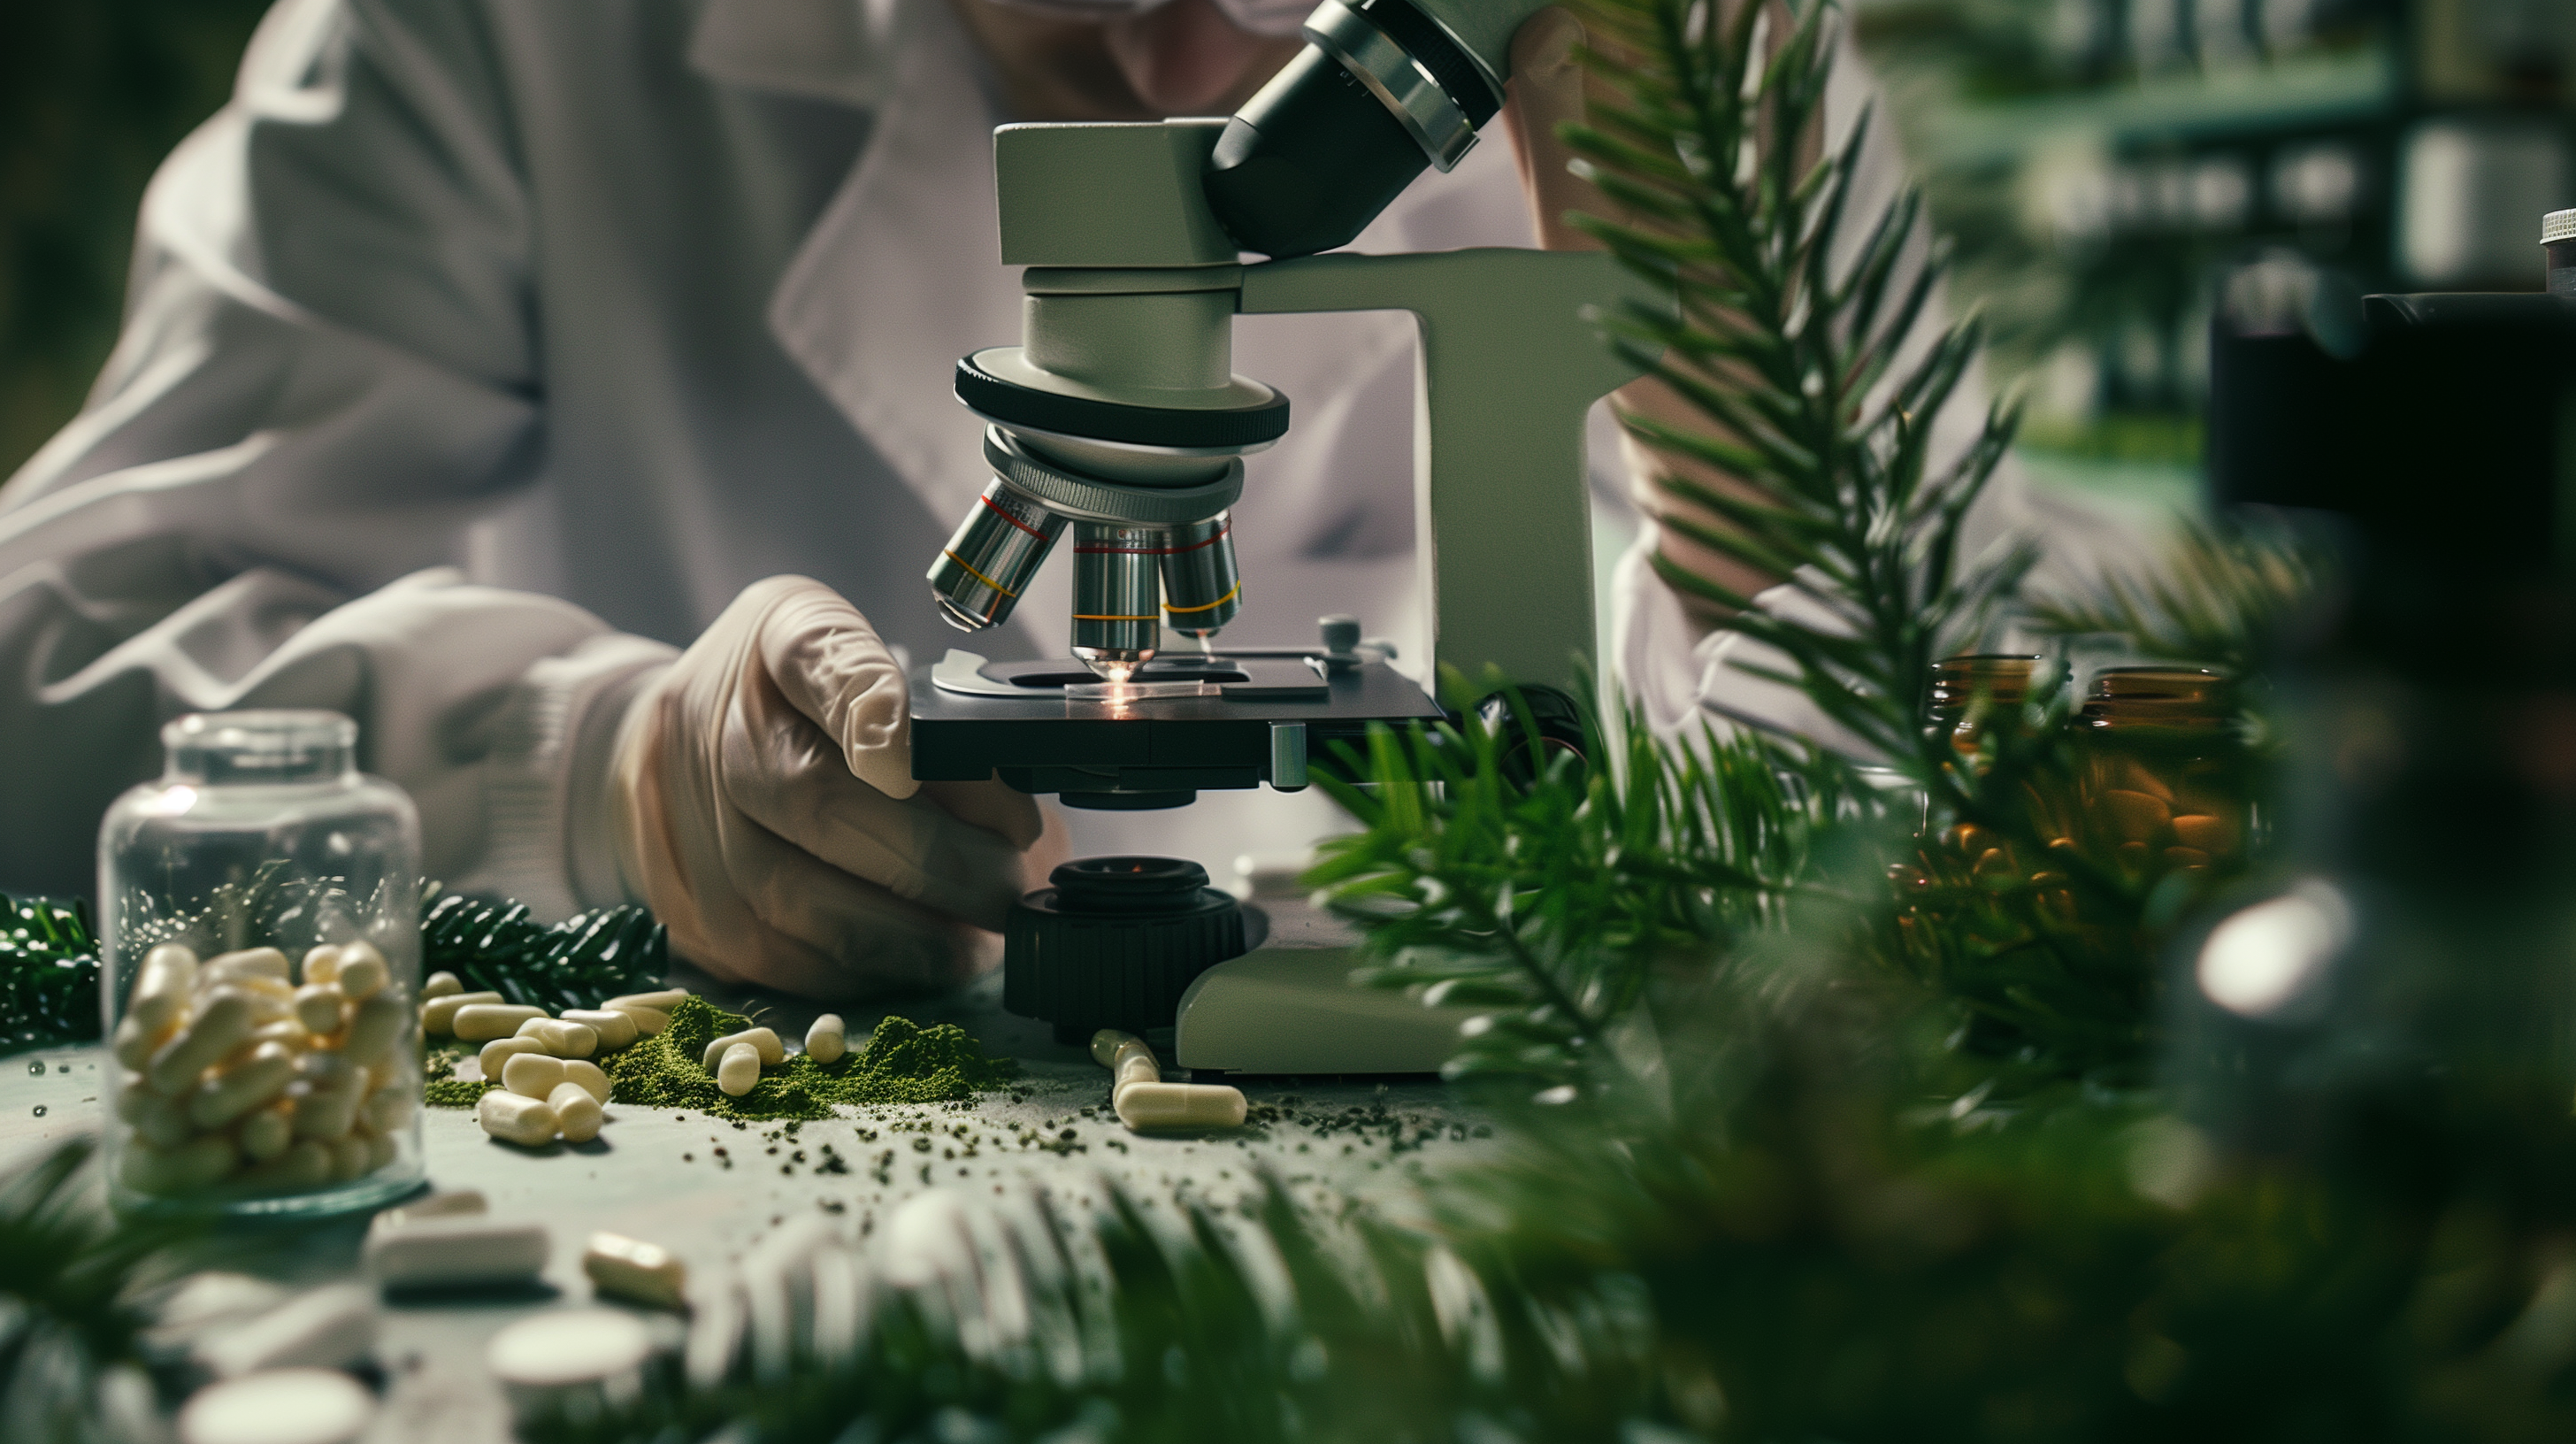 a scientist examining a guggul plant under a microscope